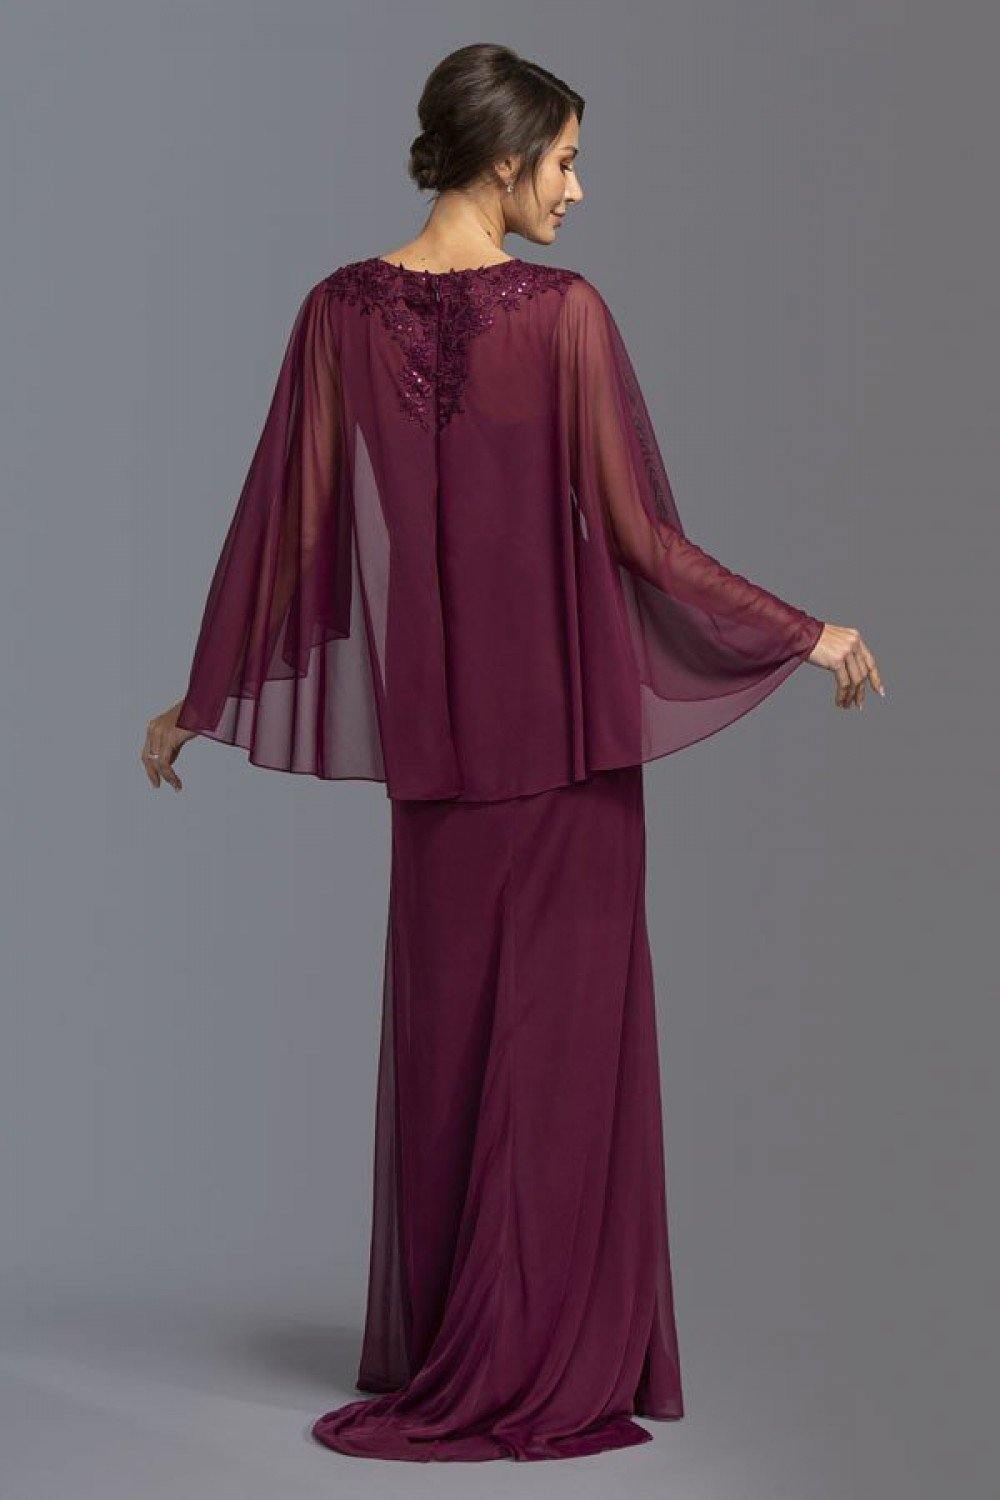 Long Formal Dress with Cape Plum - The Dress Outlet ASpeed